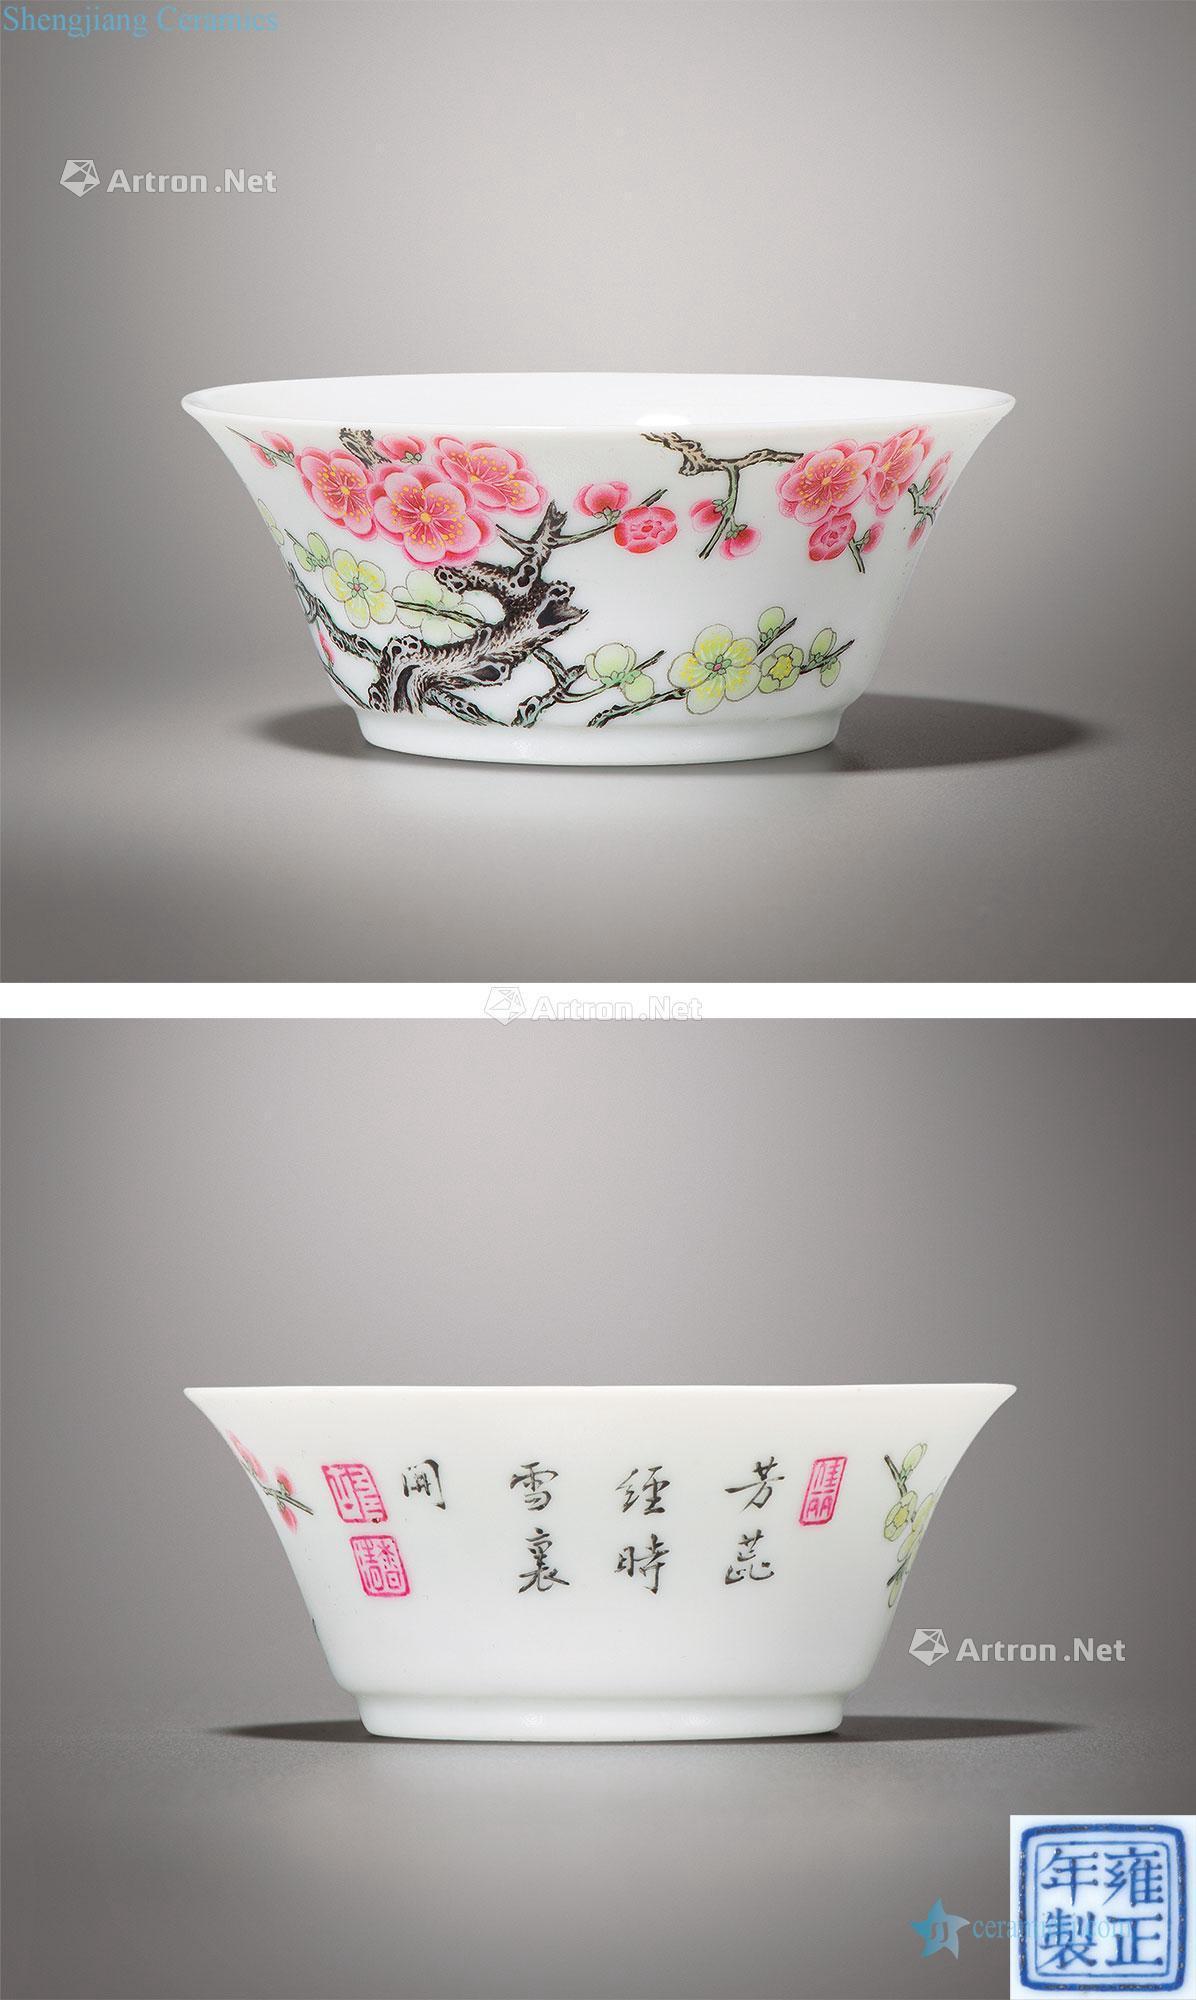 Qing in the eighteenth century Pastel plum blossom verse horseshoe cup